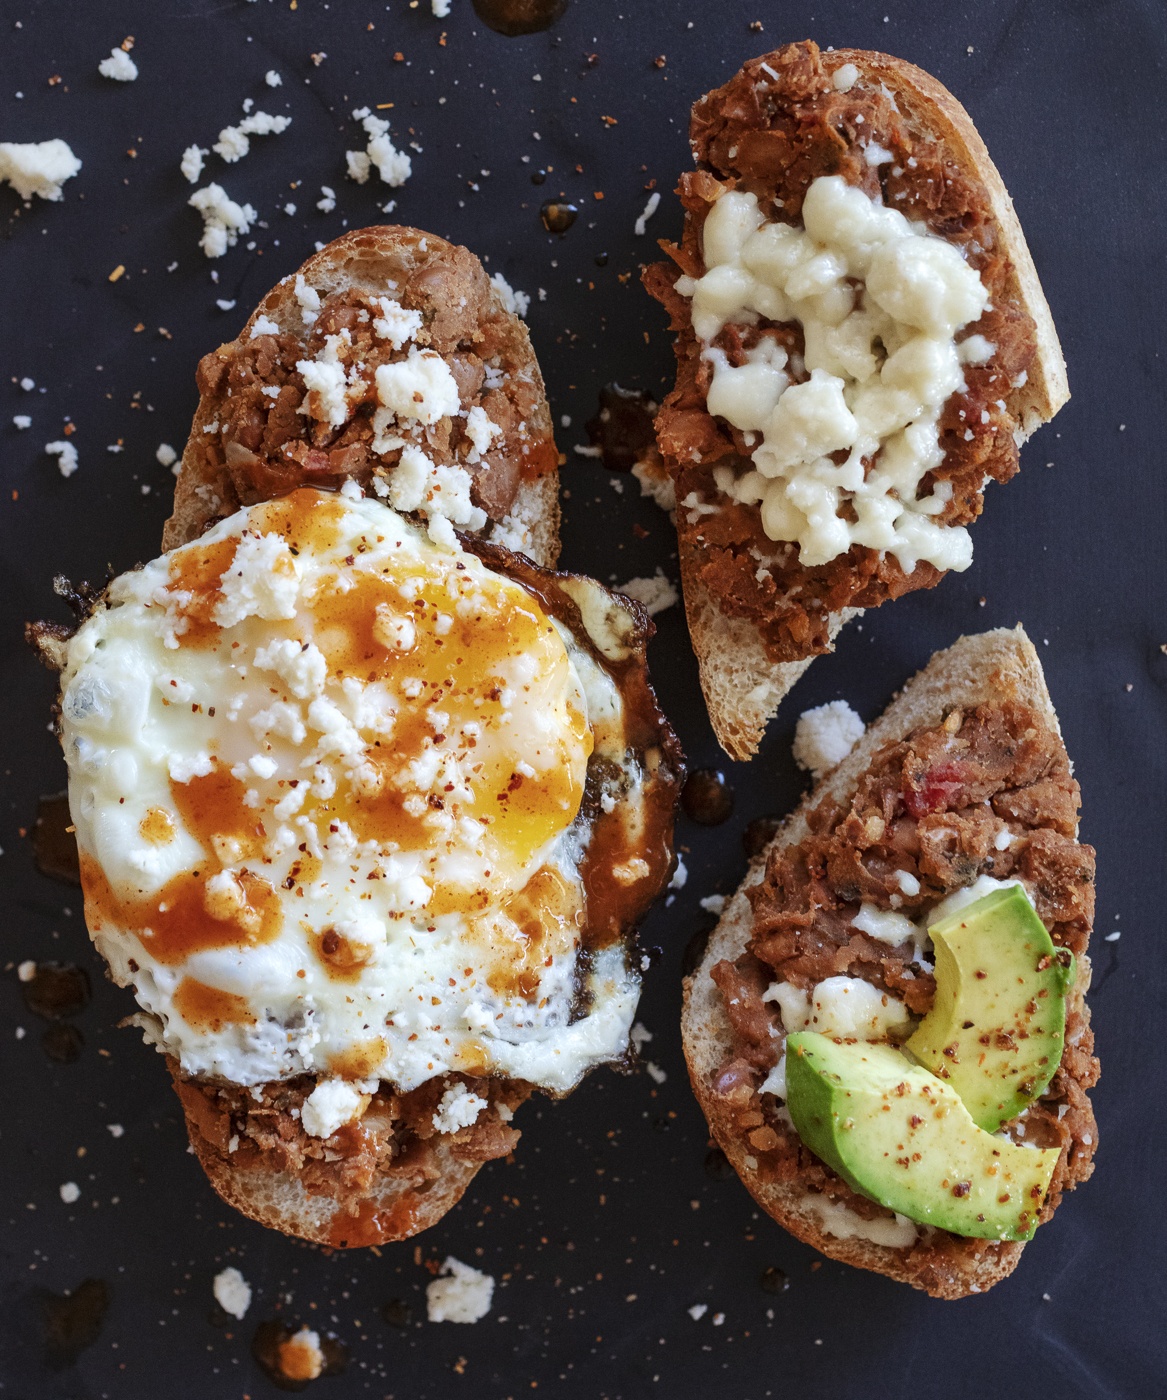 molletes with egg, queso fresco, beans avocado and hot sauce